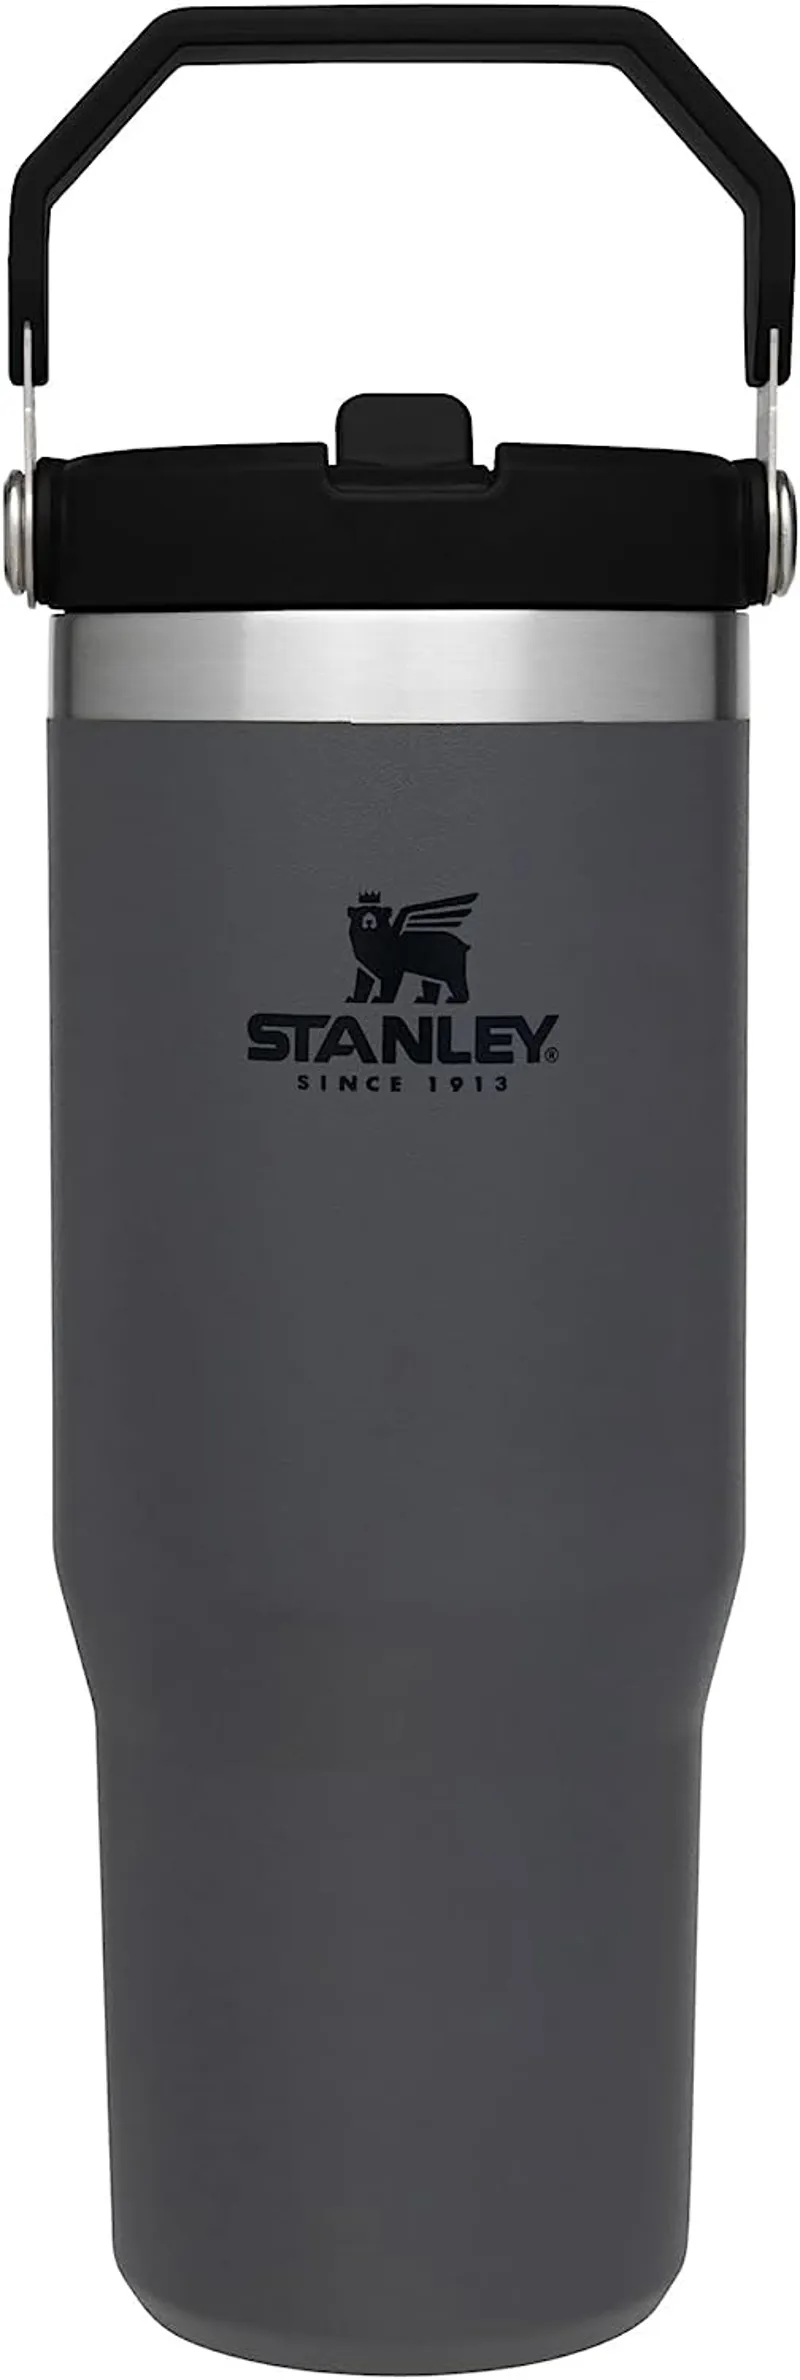 Stanley The IceFlow Flip Straw Tumbler Charcoal 0.89L - Stanley